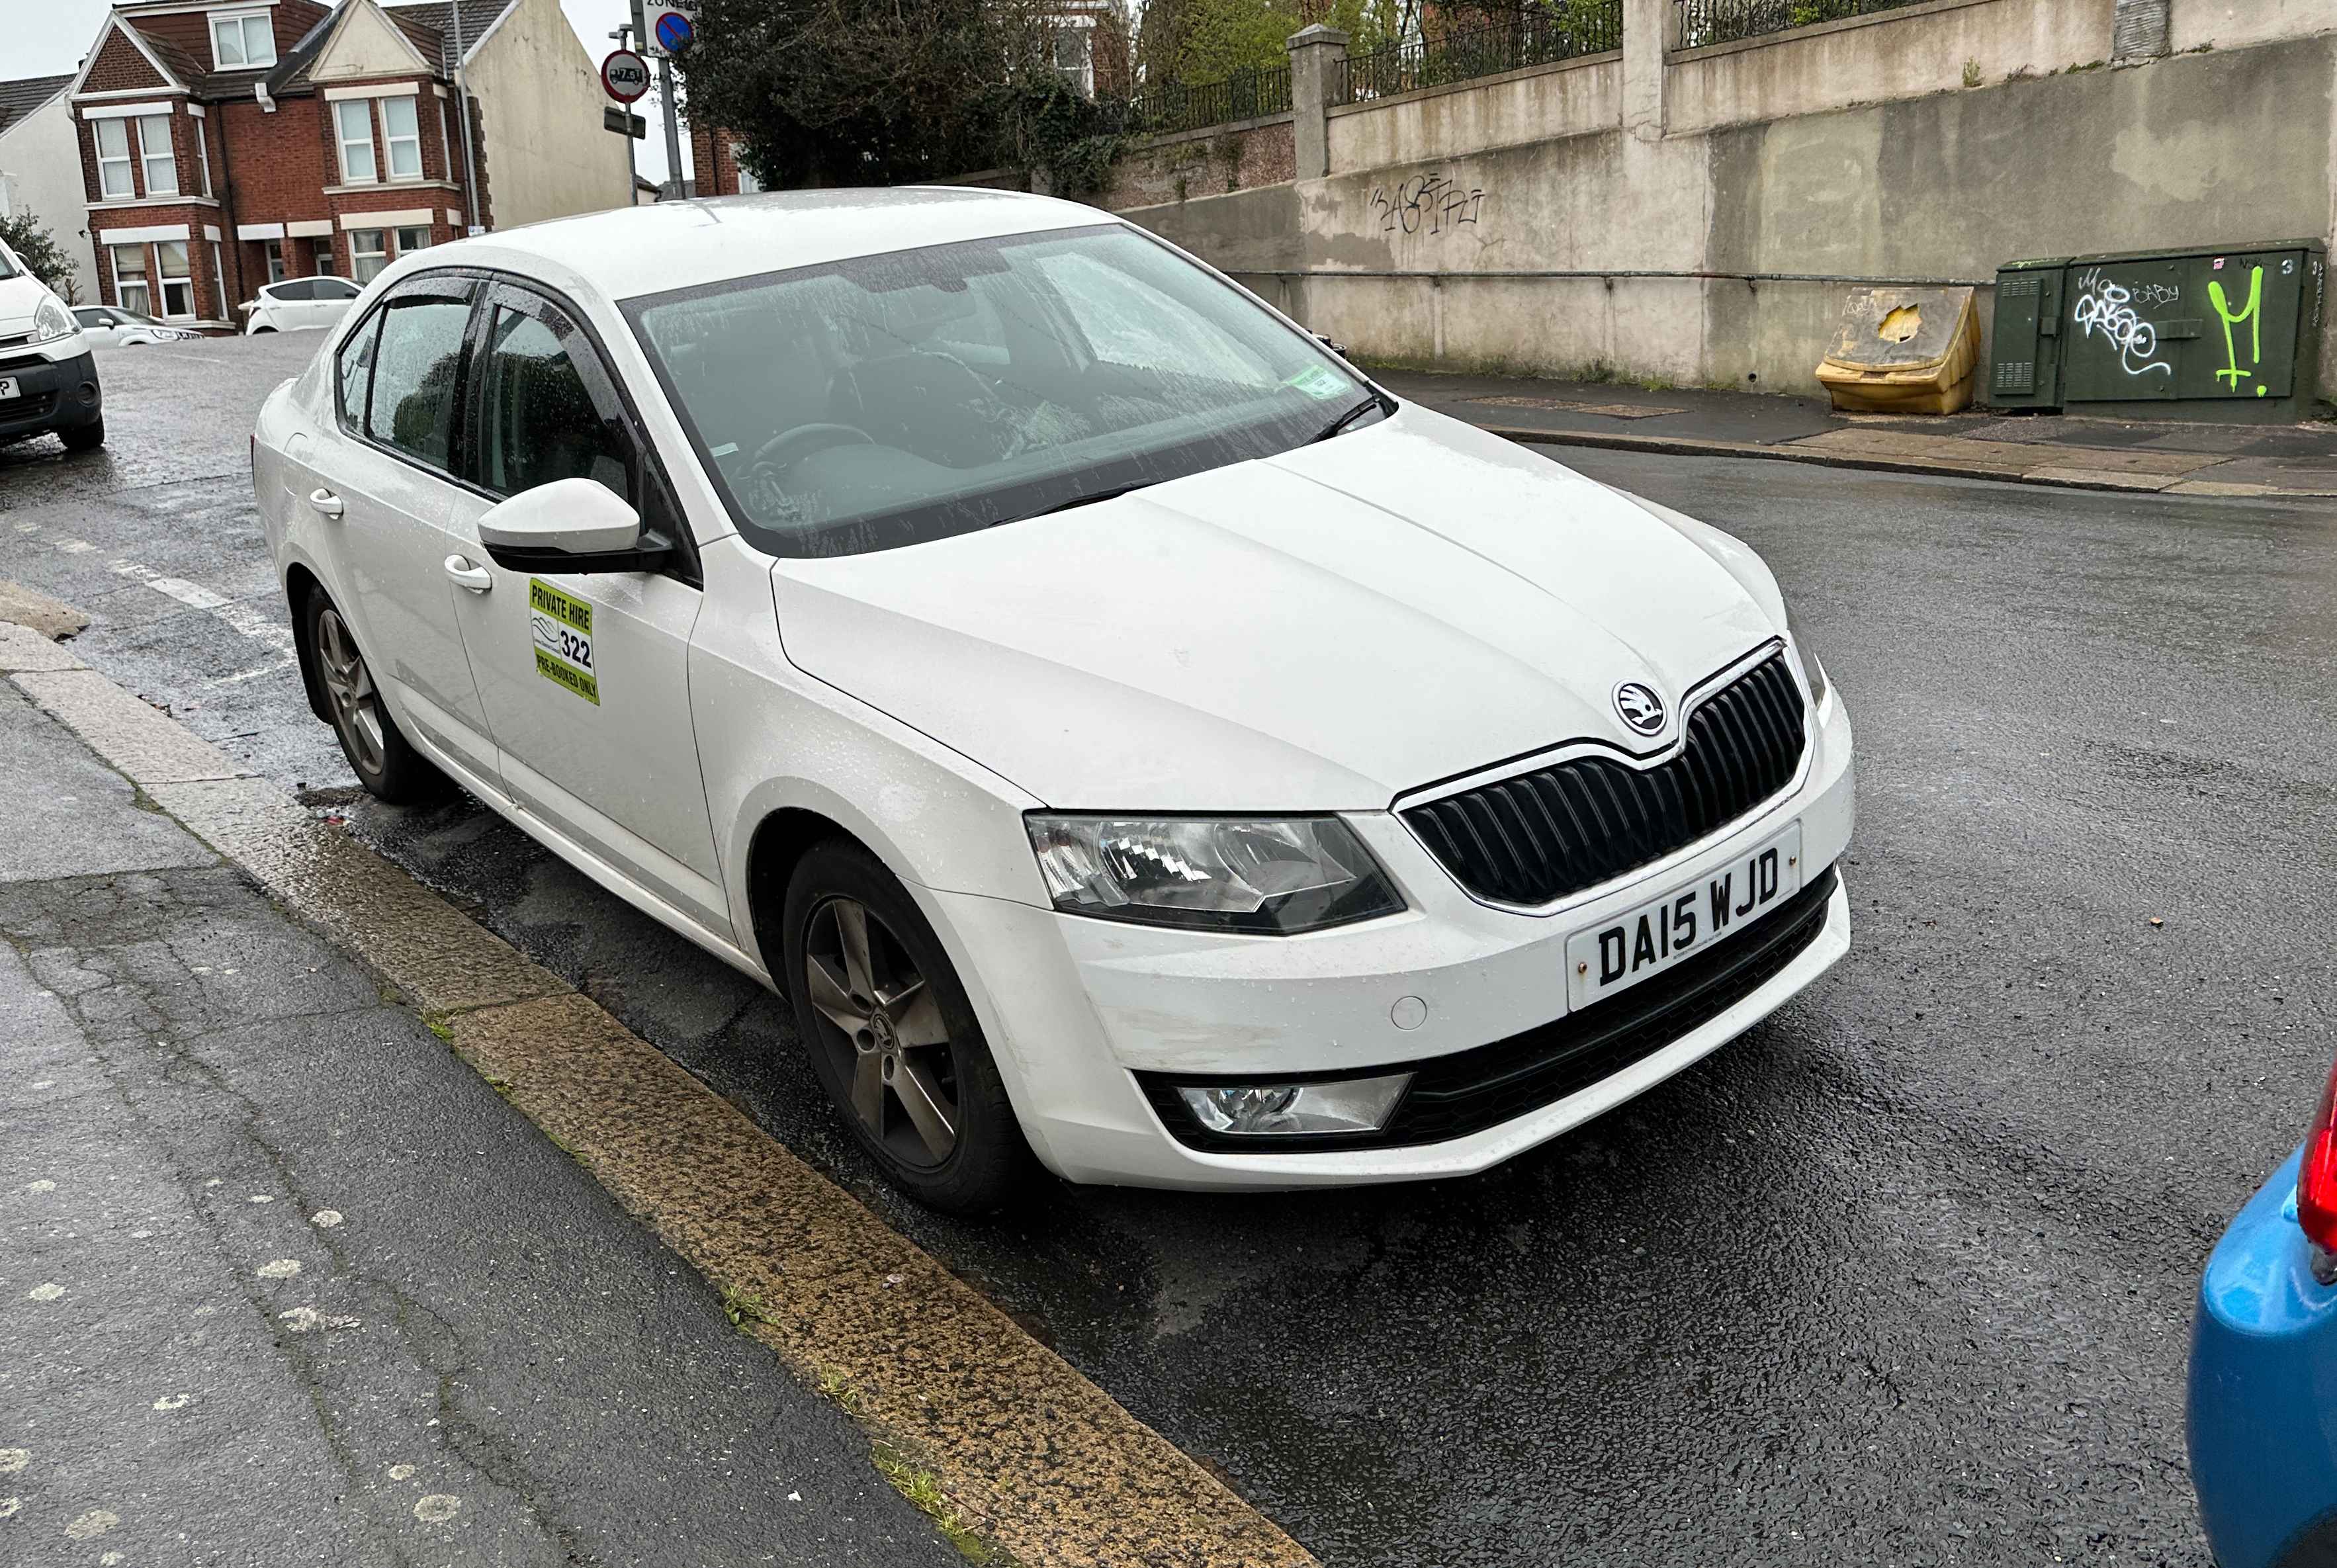 Photograph of DA15 WJD - a White Skoda Octavia taxi parked in Hollingdean by a non-resident. The first of five photographs supplied by the residents of Hollingdean.